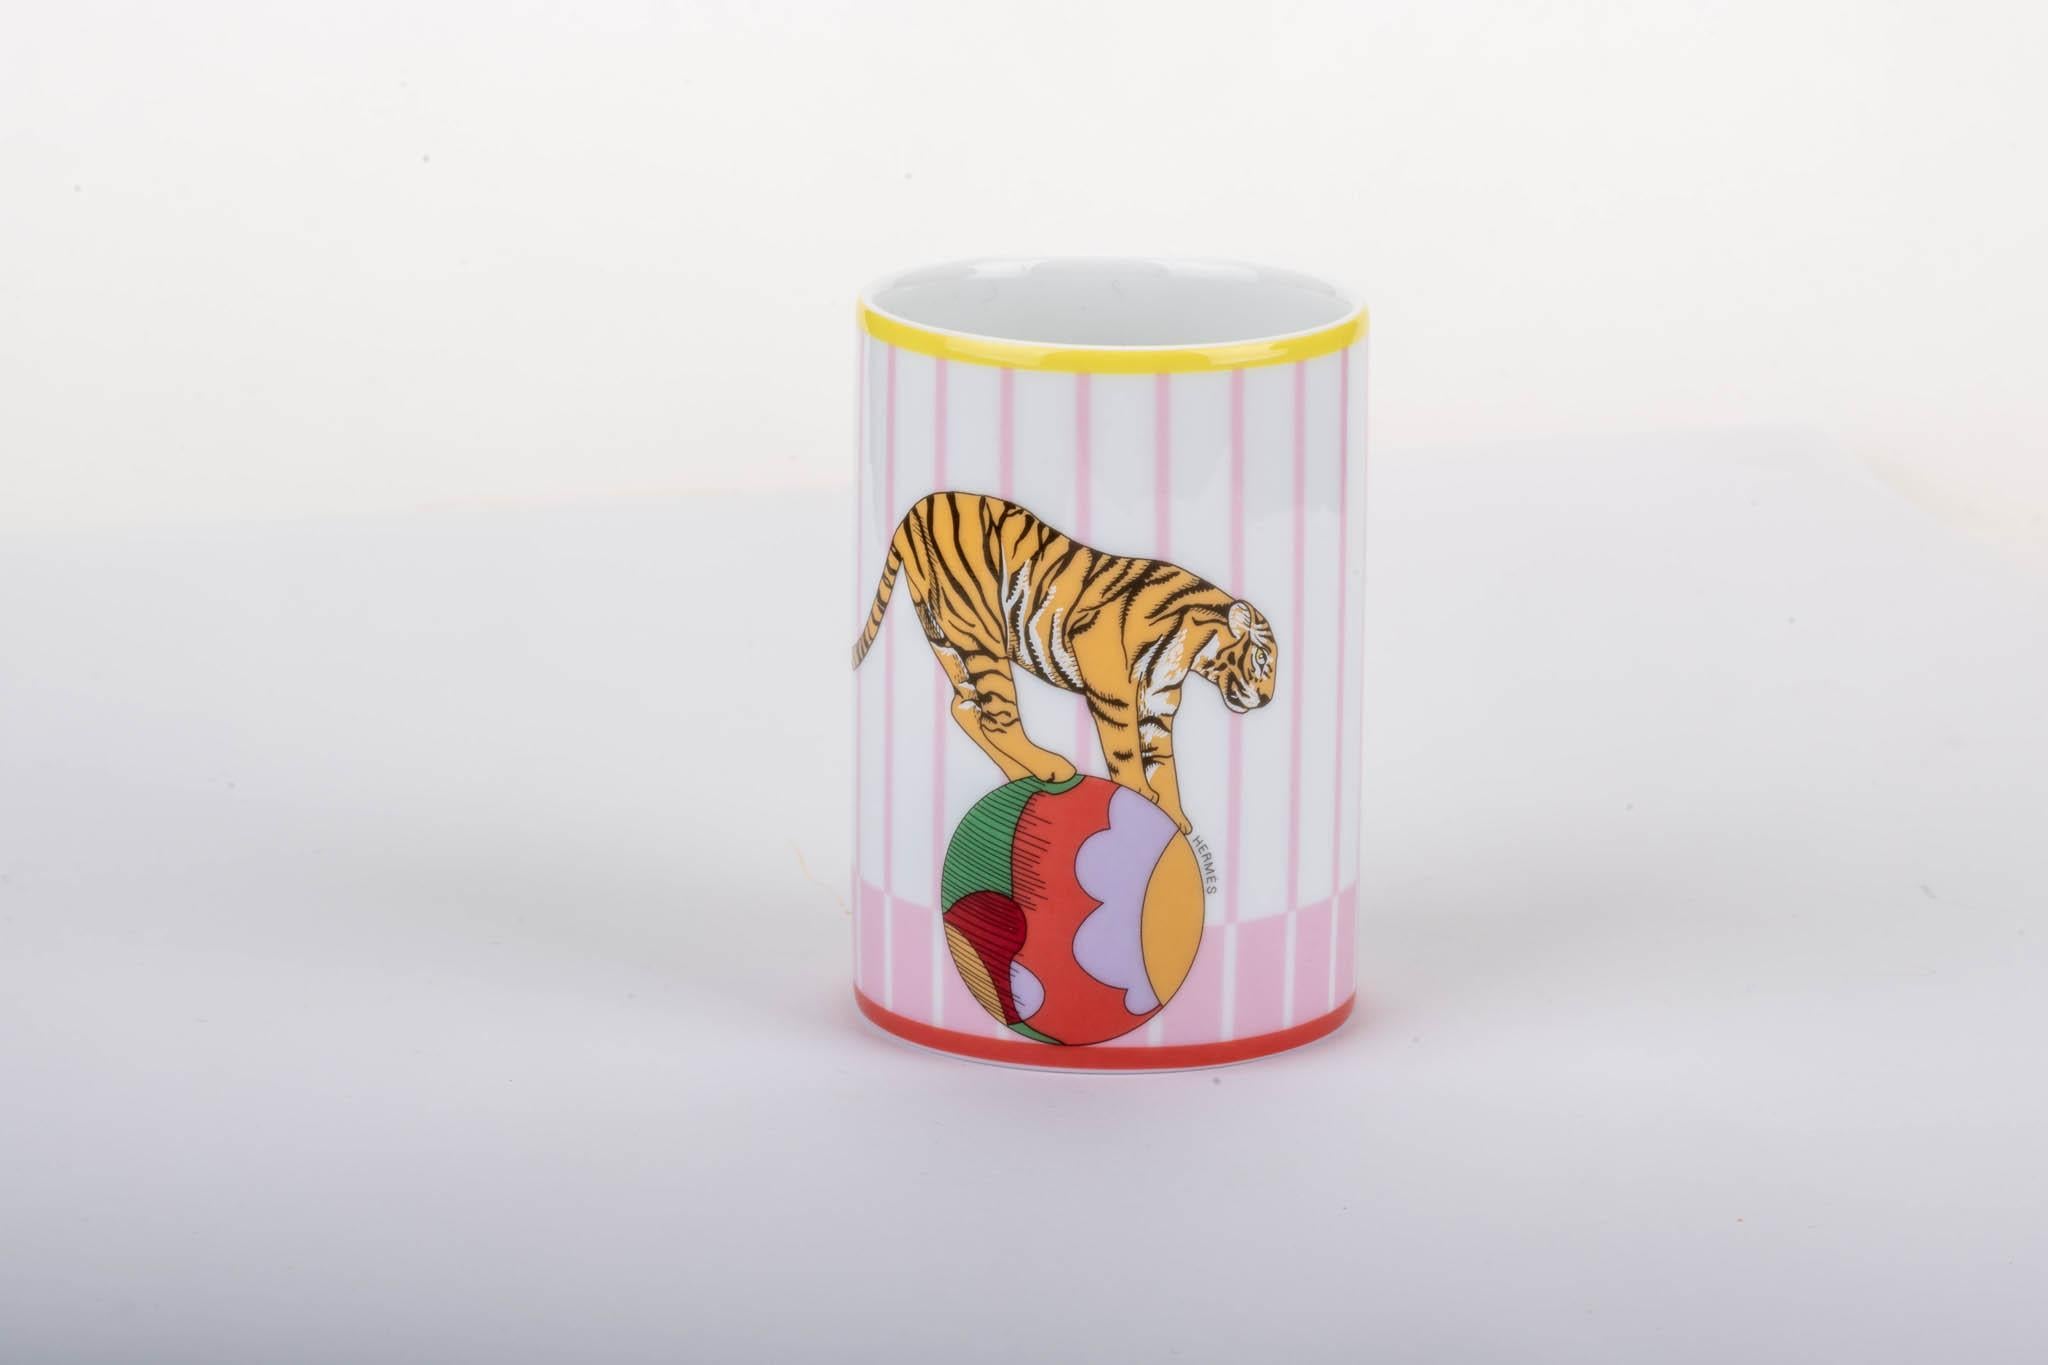 Hermes brand new in box porcelain tumbler , circus collection. Pink and white combination. Colors might contain cobalt.